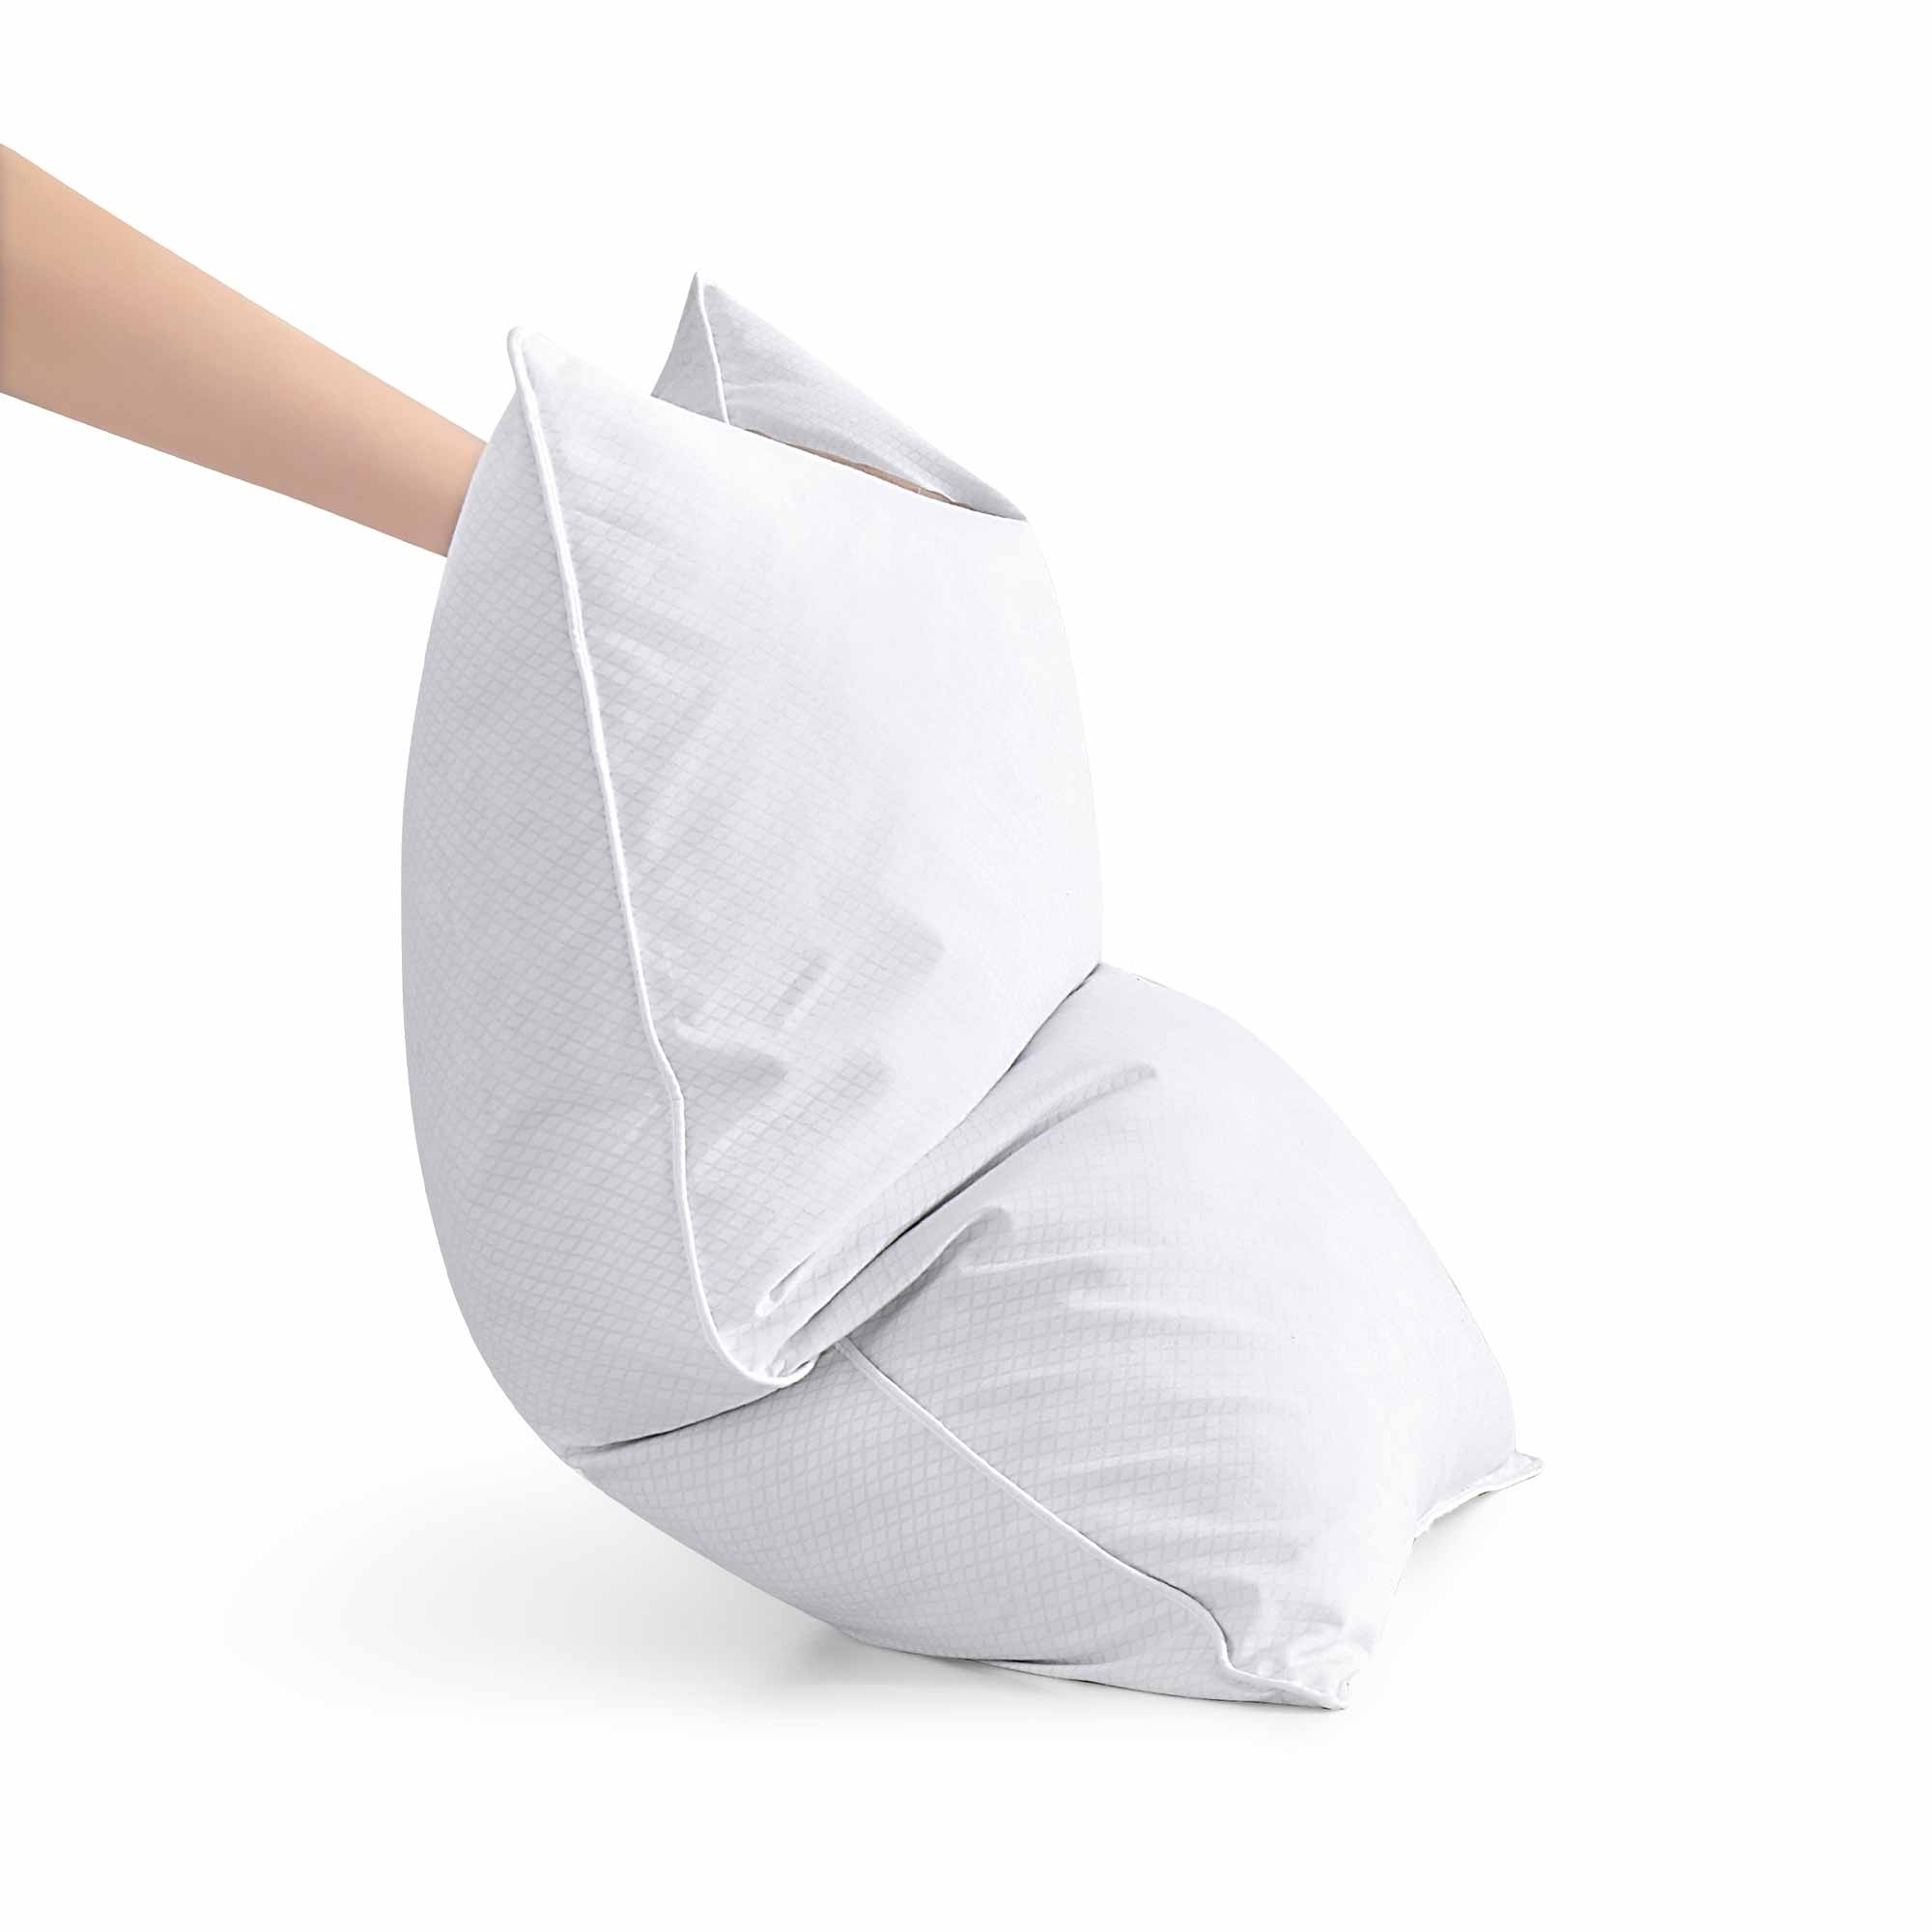 2 Pack Cooling Pillows For Side And Back Sleepers, Goose Down Feather Pillow - White, Standard/Queen